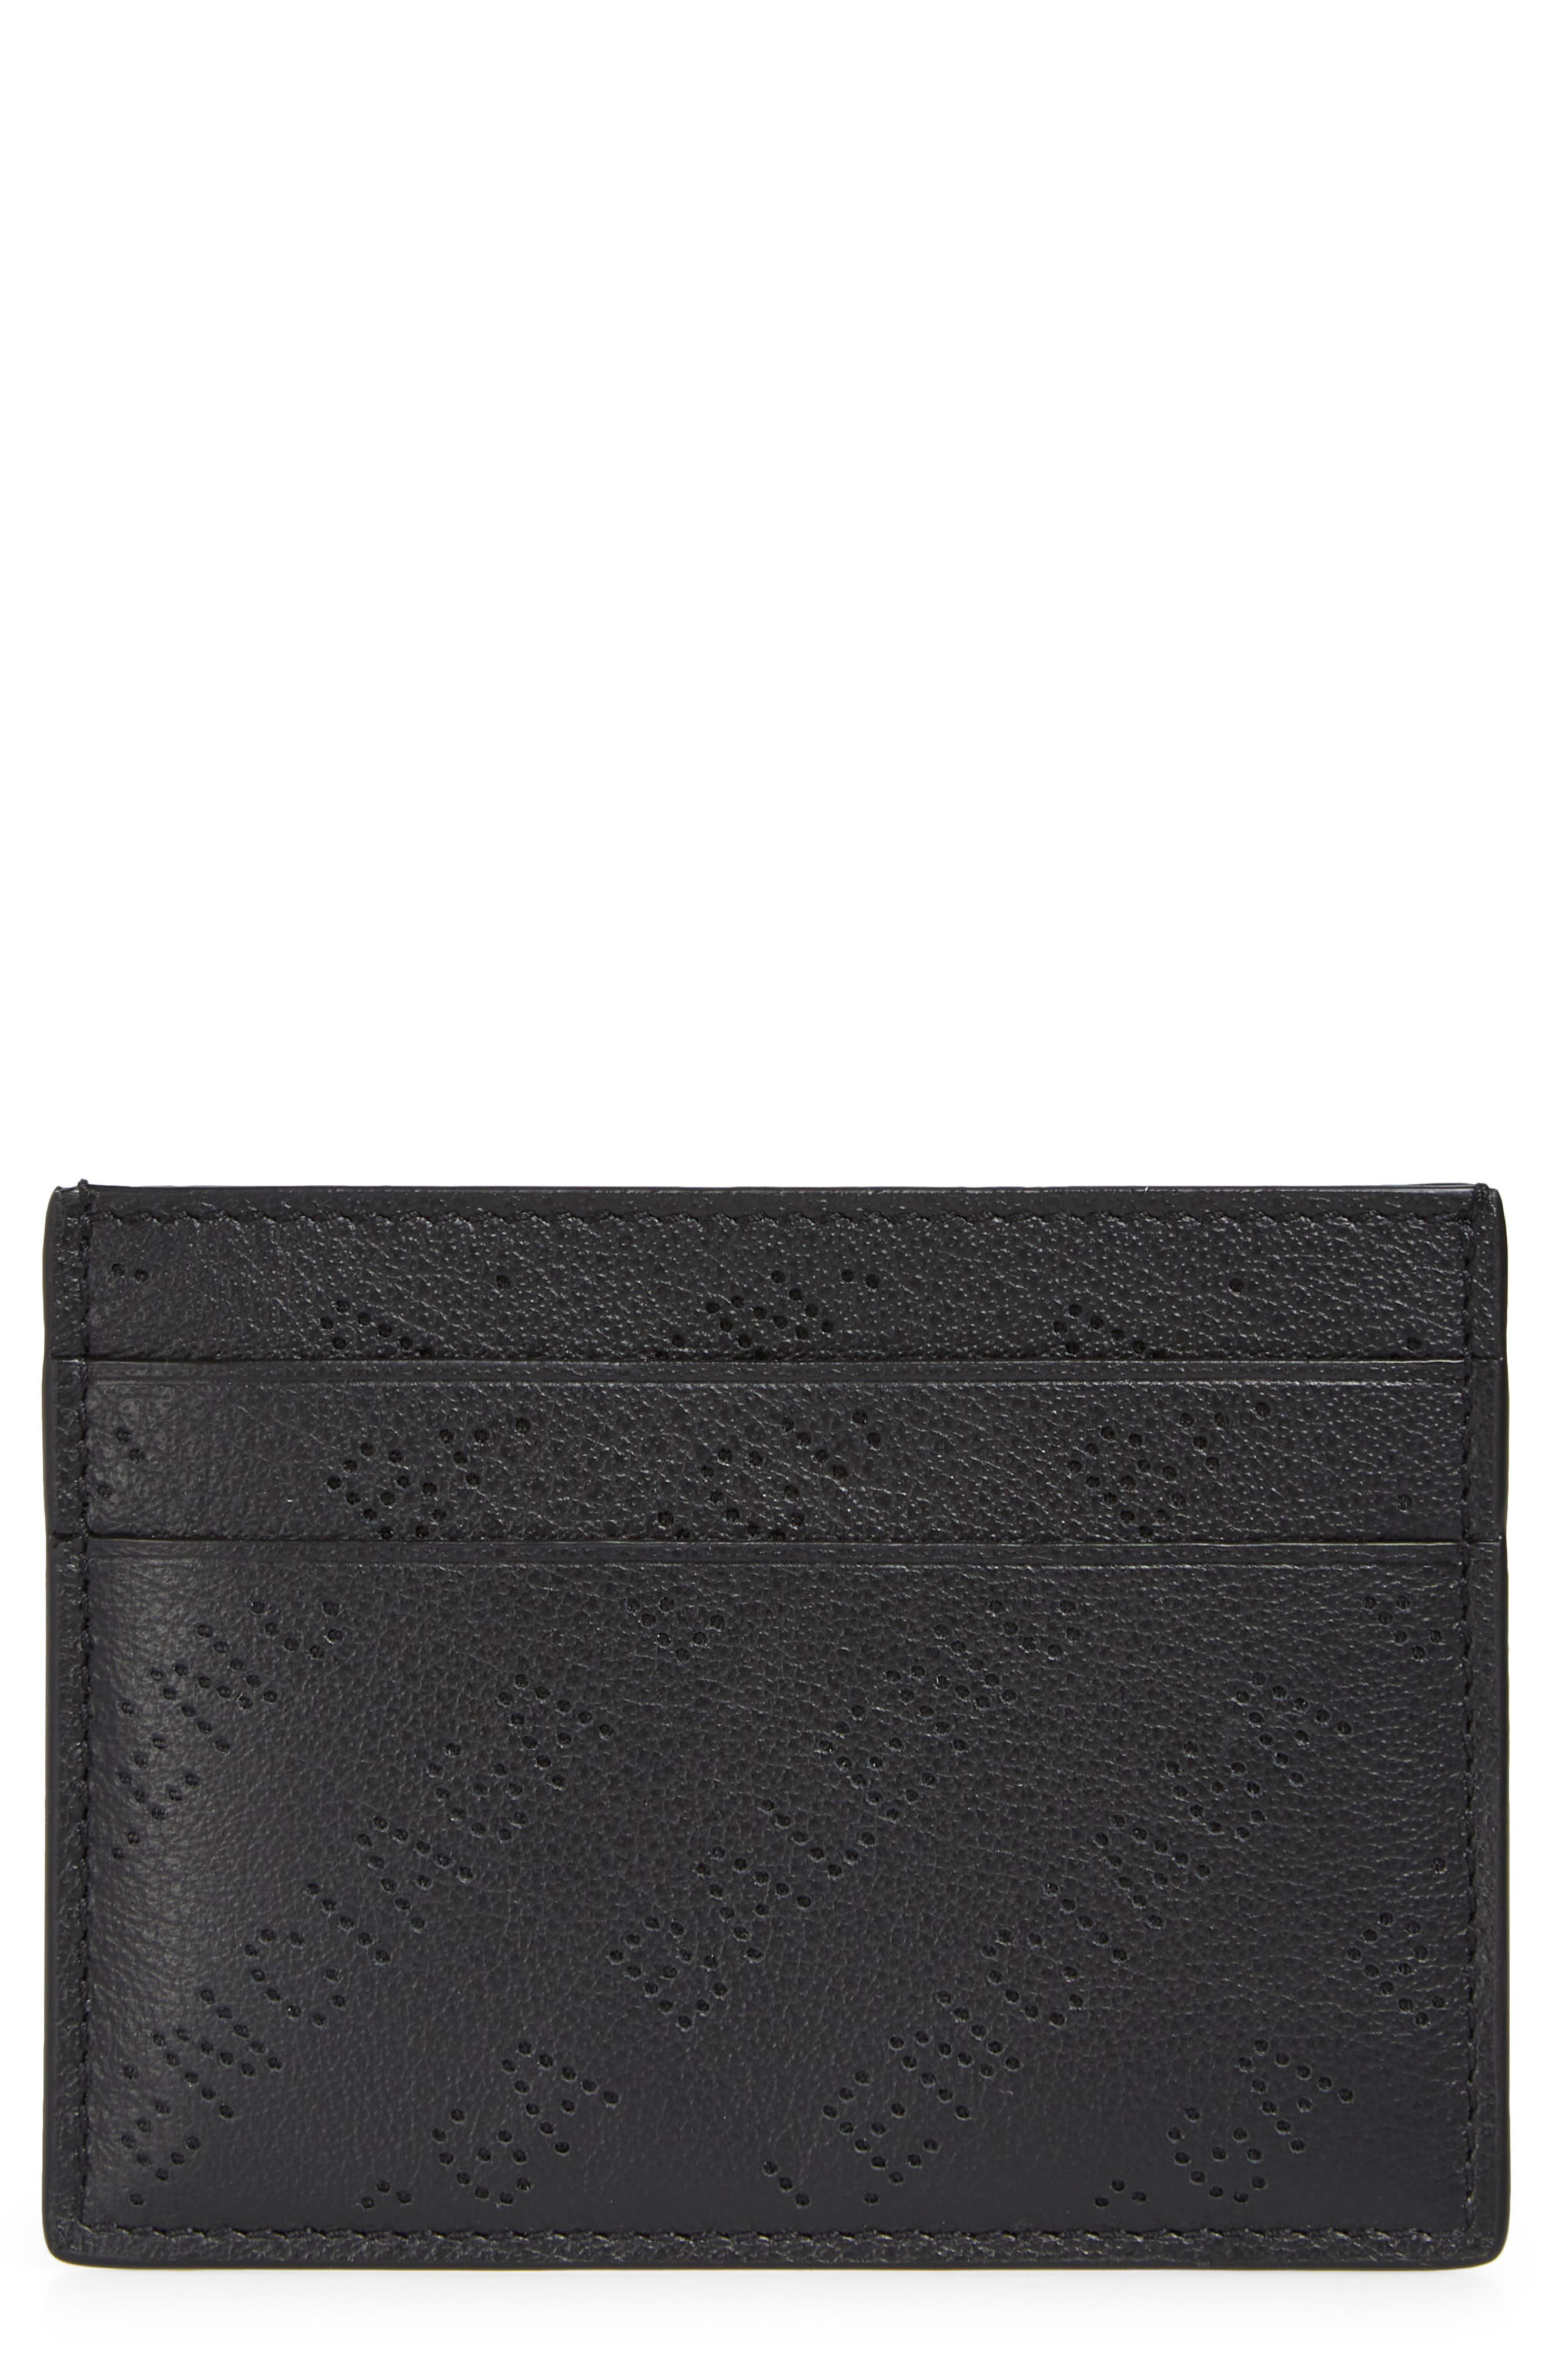 Balenciaga Perforated Logo Leather Card Case in Black at Nordstrom